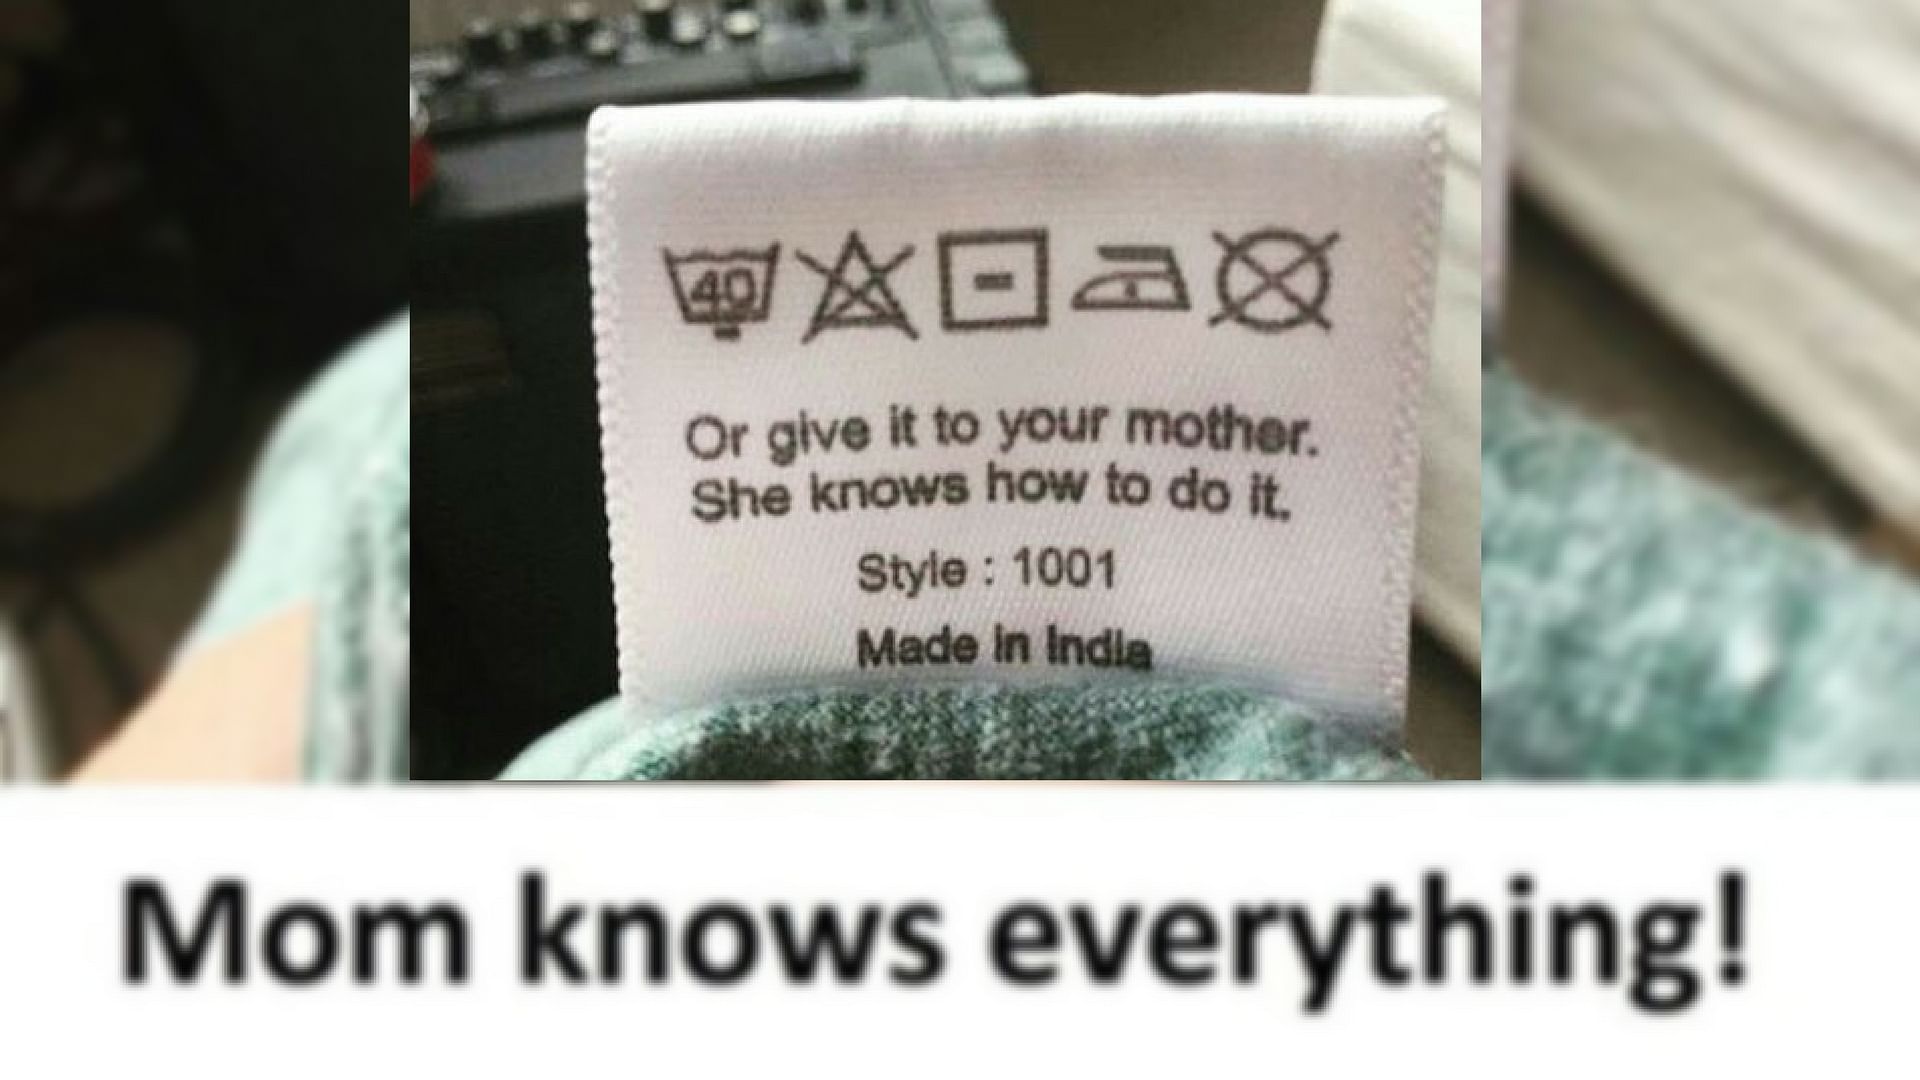 Mom knows everything!&nbsp;